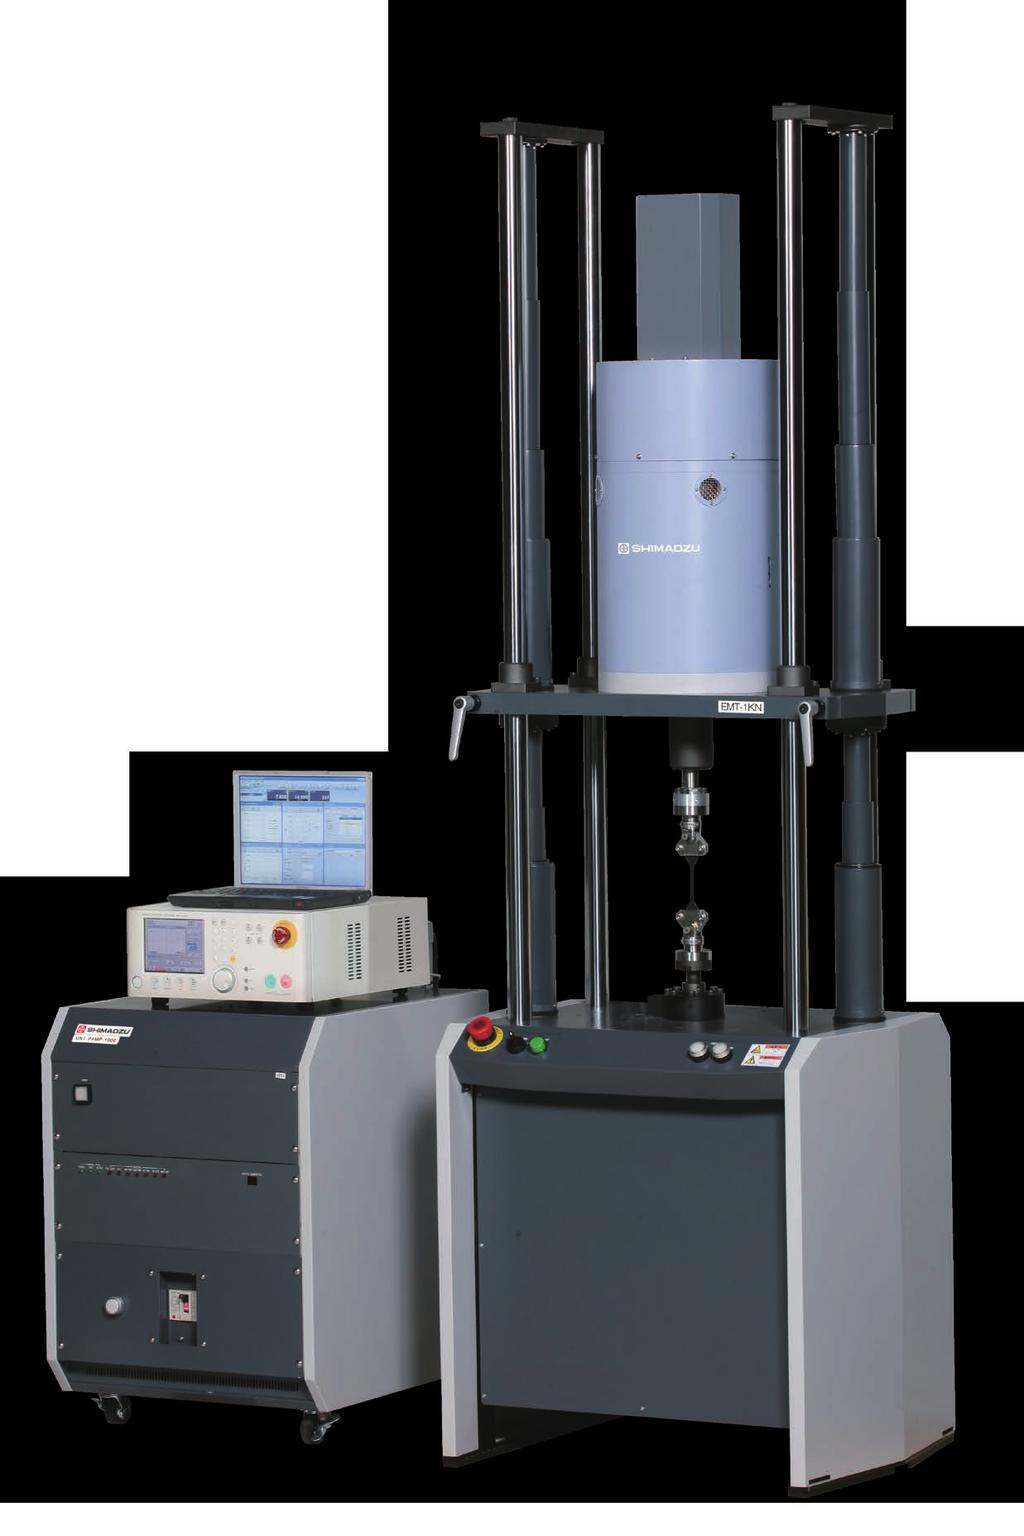 Electromagnetic Force Dynamic and Fatigue Testing System EMT Series Allows Long Stroke Lengths and Fast and Highly